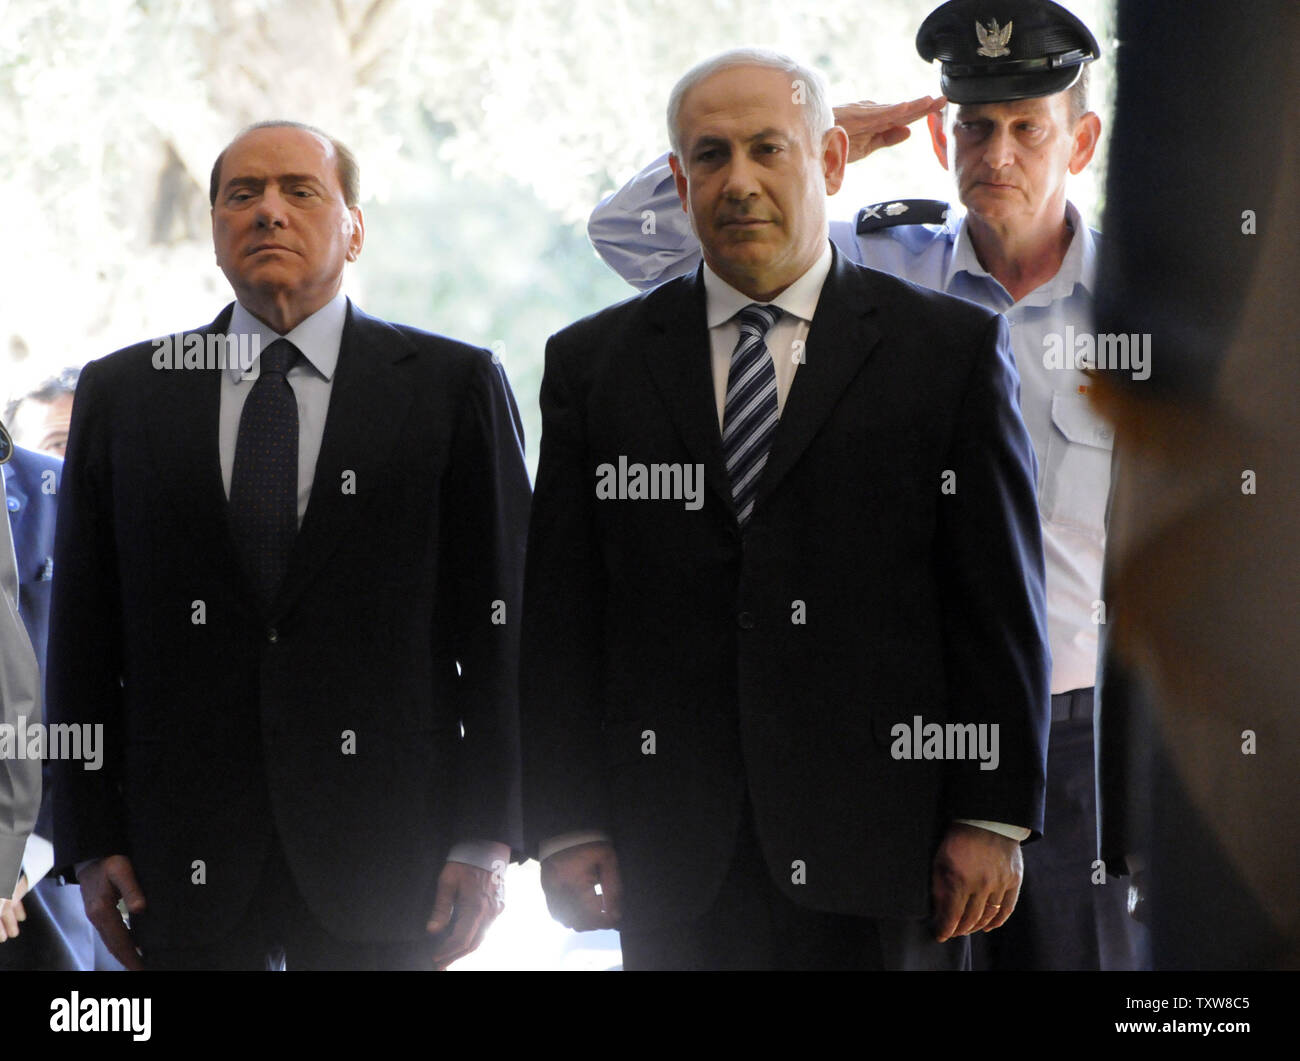 L-R:  Italian Prime Minister Silvio Berlusconi and Israeli Prime Minister Benjamin Netanyahu walk by a honor guard at a welcoming ceremony at Netanyahu's Jerusalem office, February 1, 2010. Prime Minister Berlusconi is in Israel for a three- day visit.   UPI/Debbie Hill Stock Photo